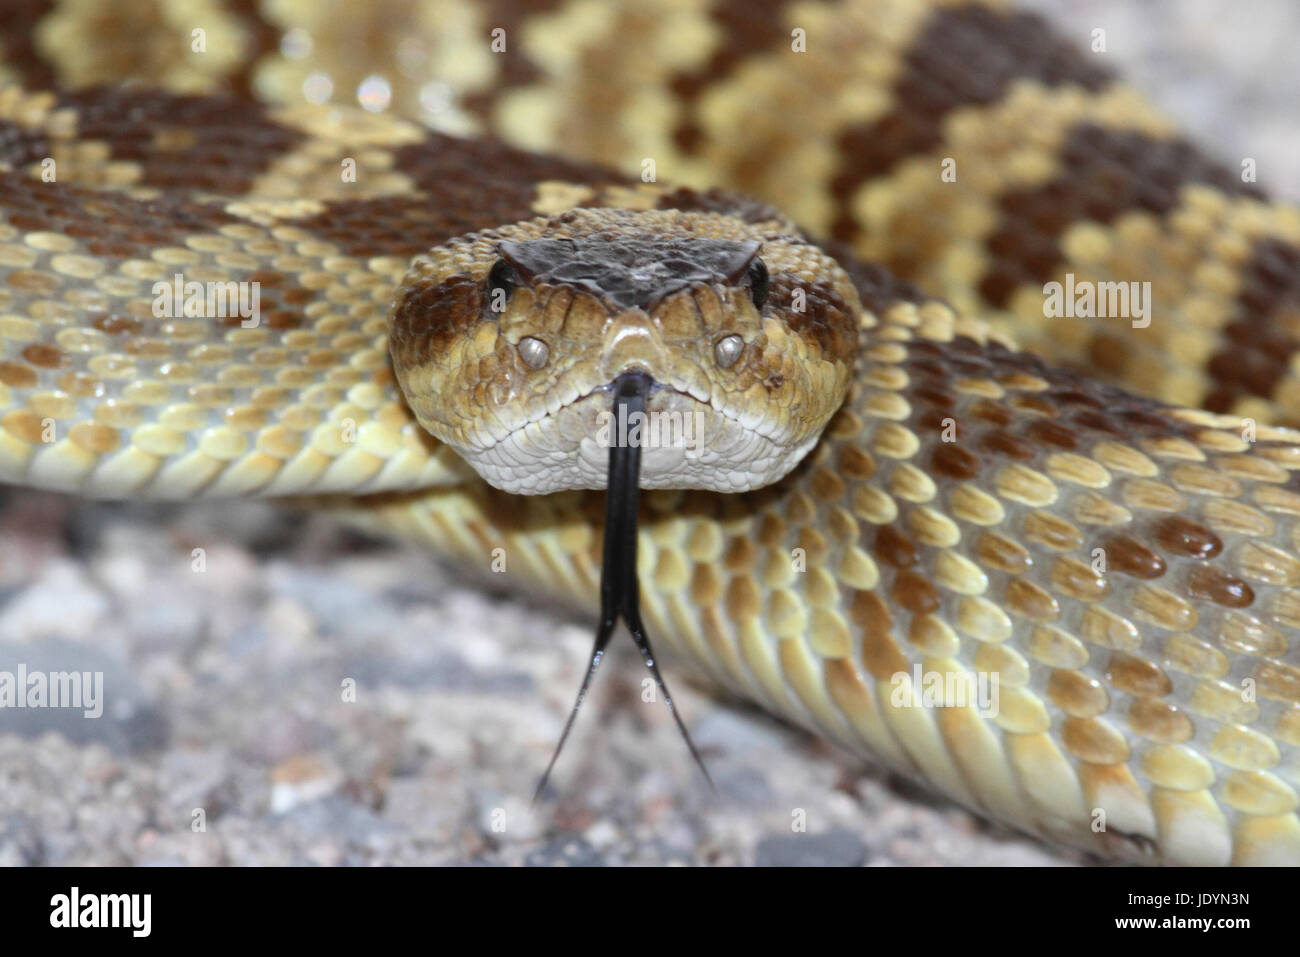 Black-tailed Rattlesnake (Crotalus molossus) coiled to strike in the desert with its tongue sticking out Stock Photo